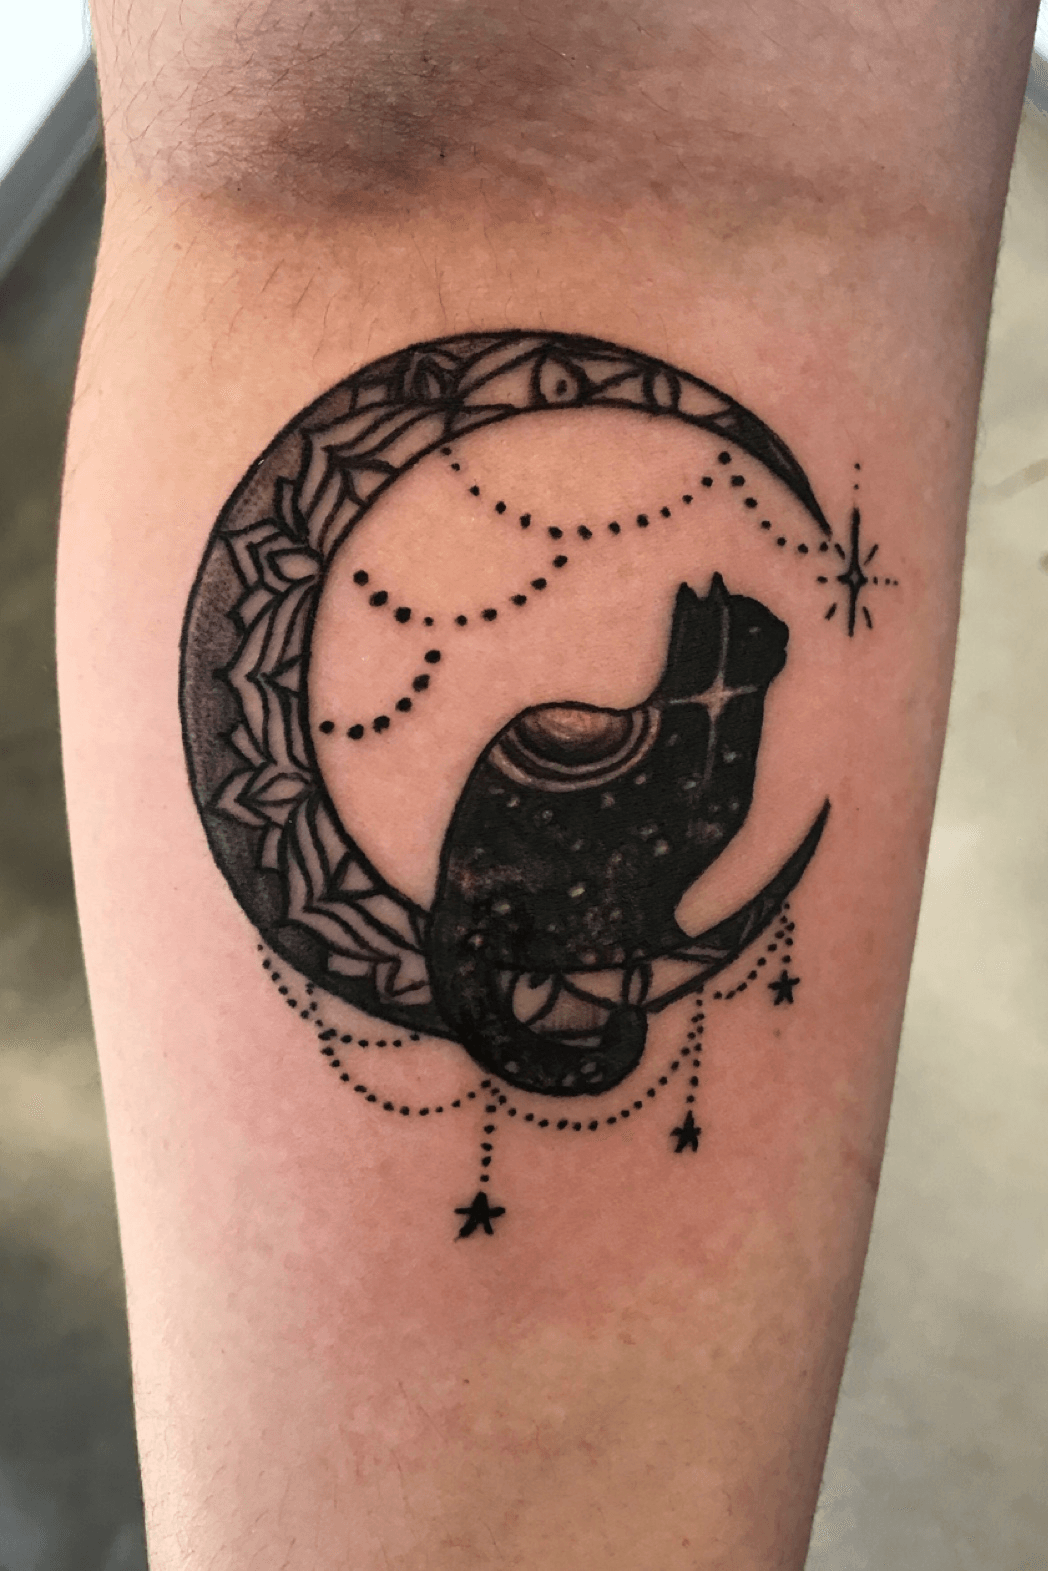 Crescent moon and cat tattoo located on the inner arm